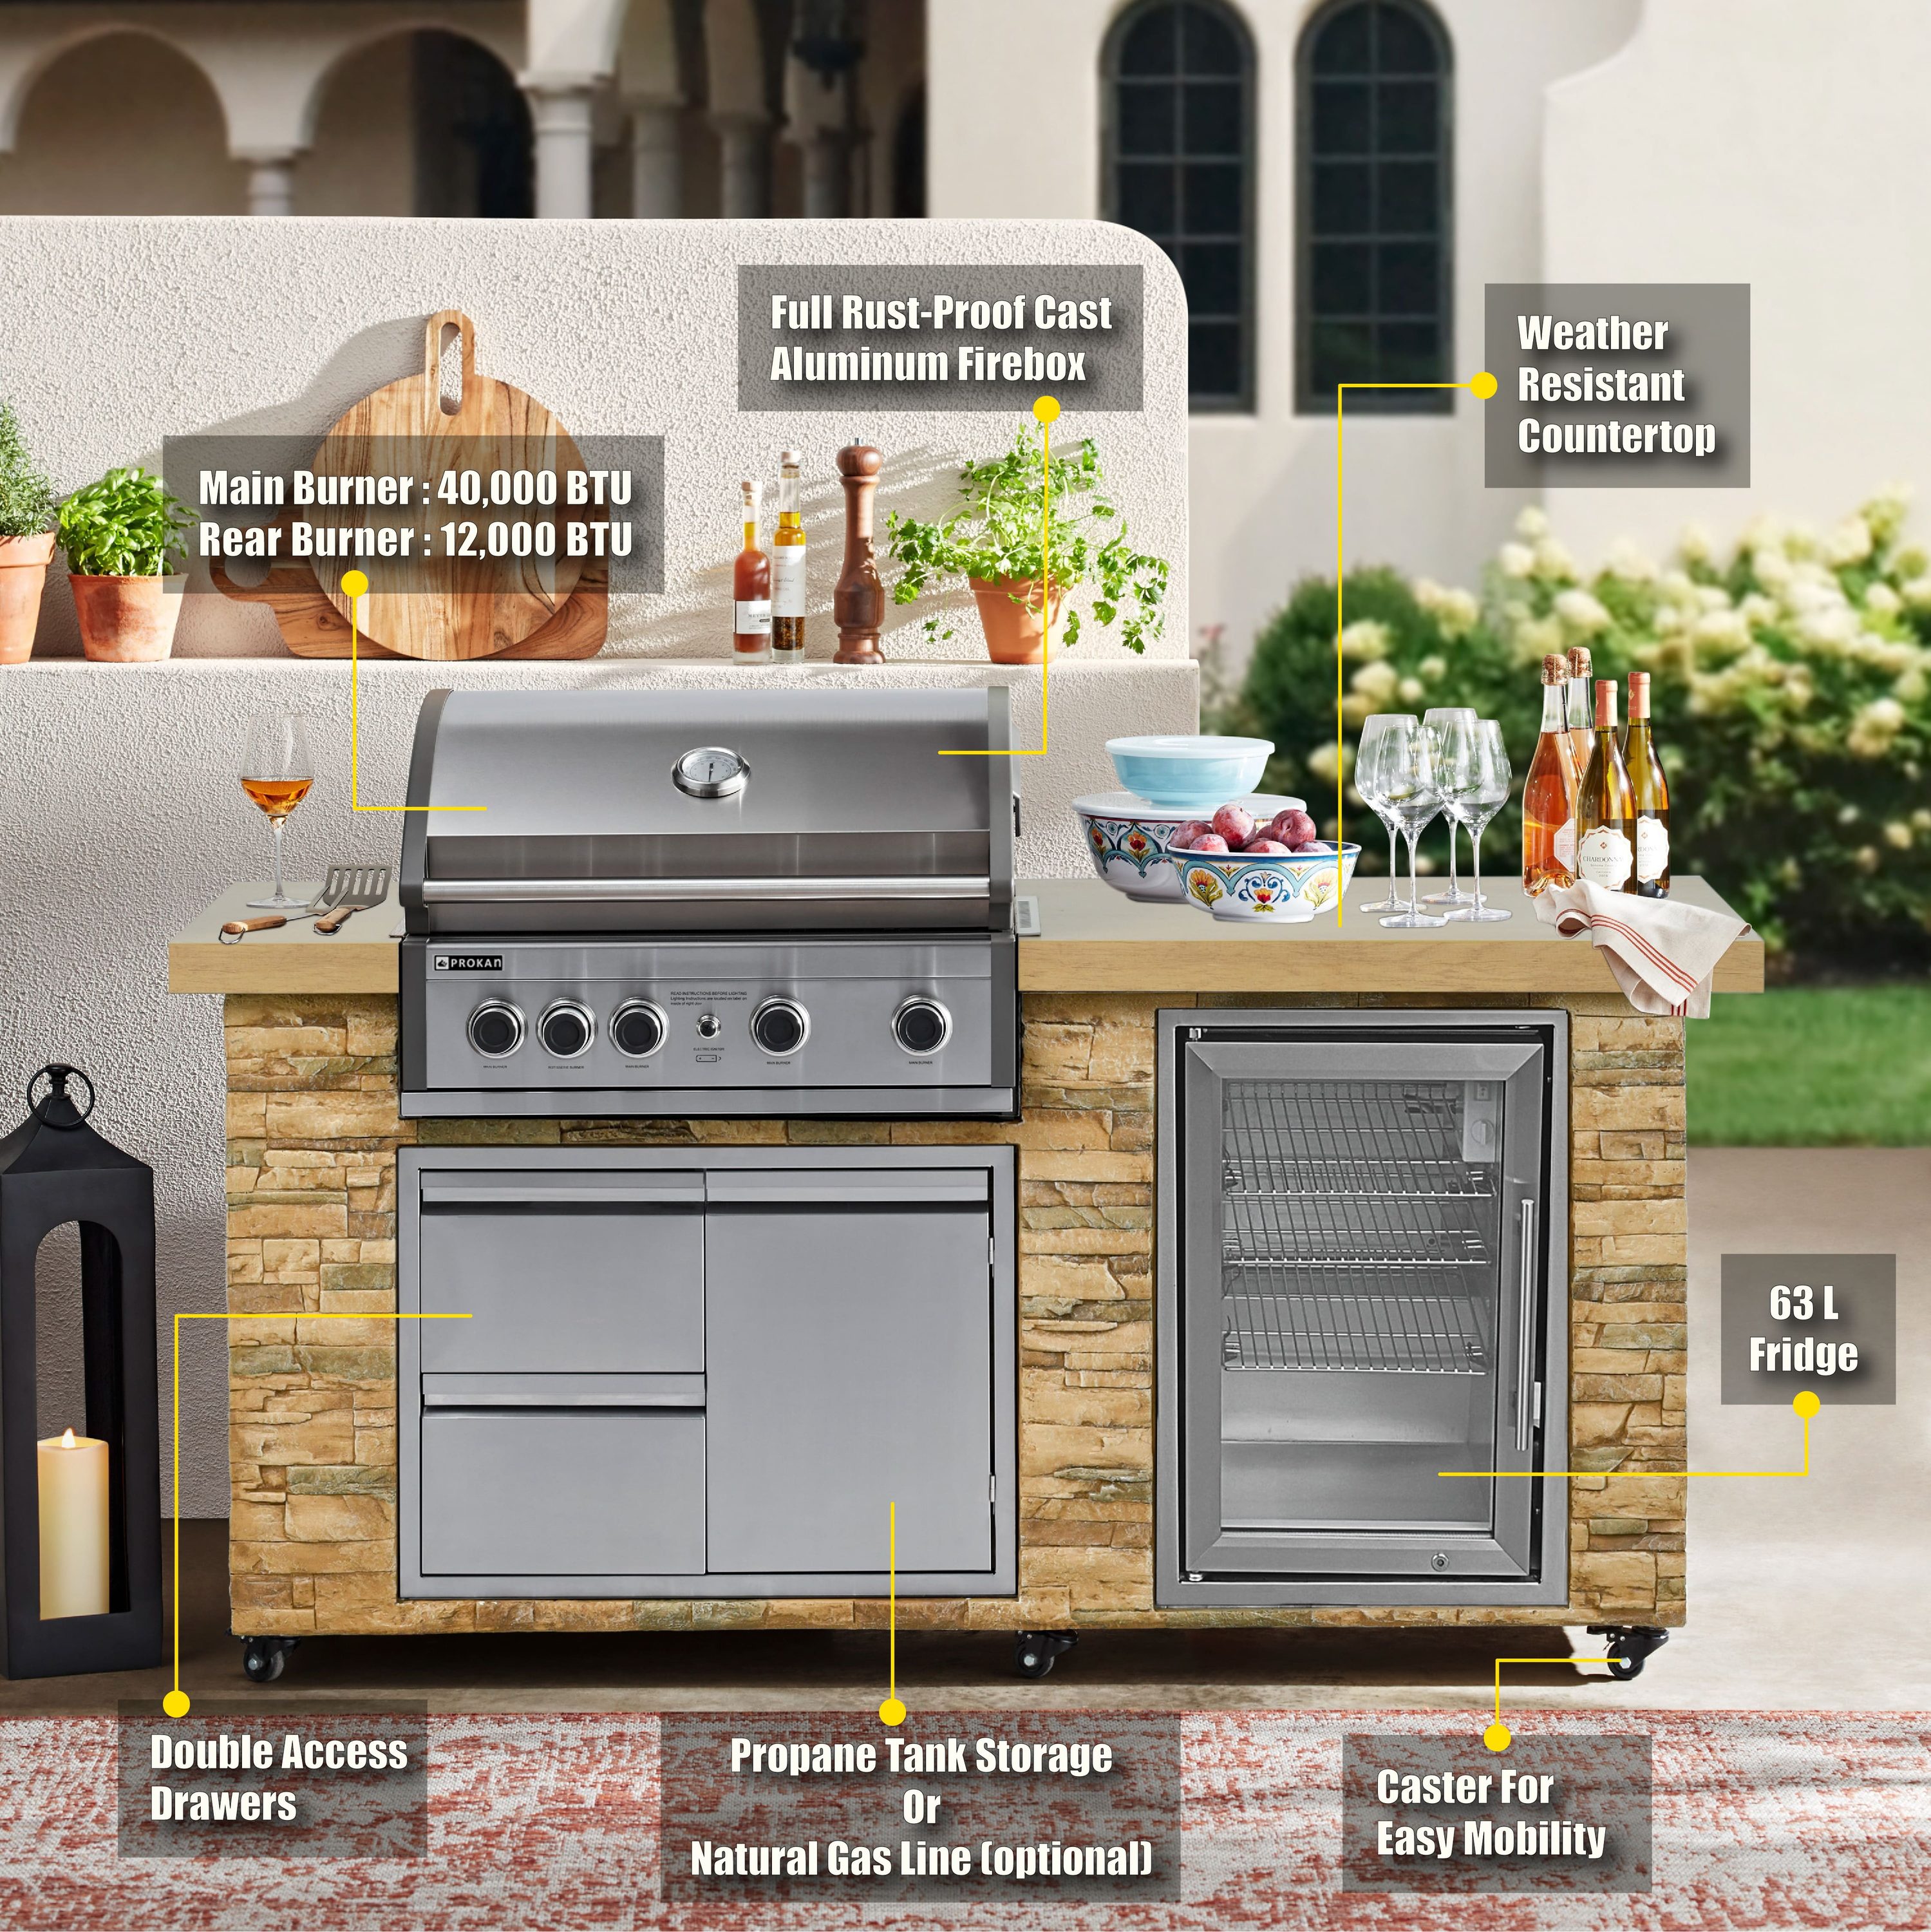 Thor Kitchen 7-Piece 32.0625-in W x 26-in D x 20-in H Outdoor Kitchen Gas  Grill with 5 Burners in the Modular Outdoor Kitchens department at